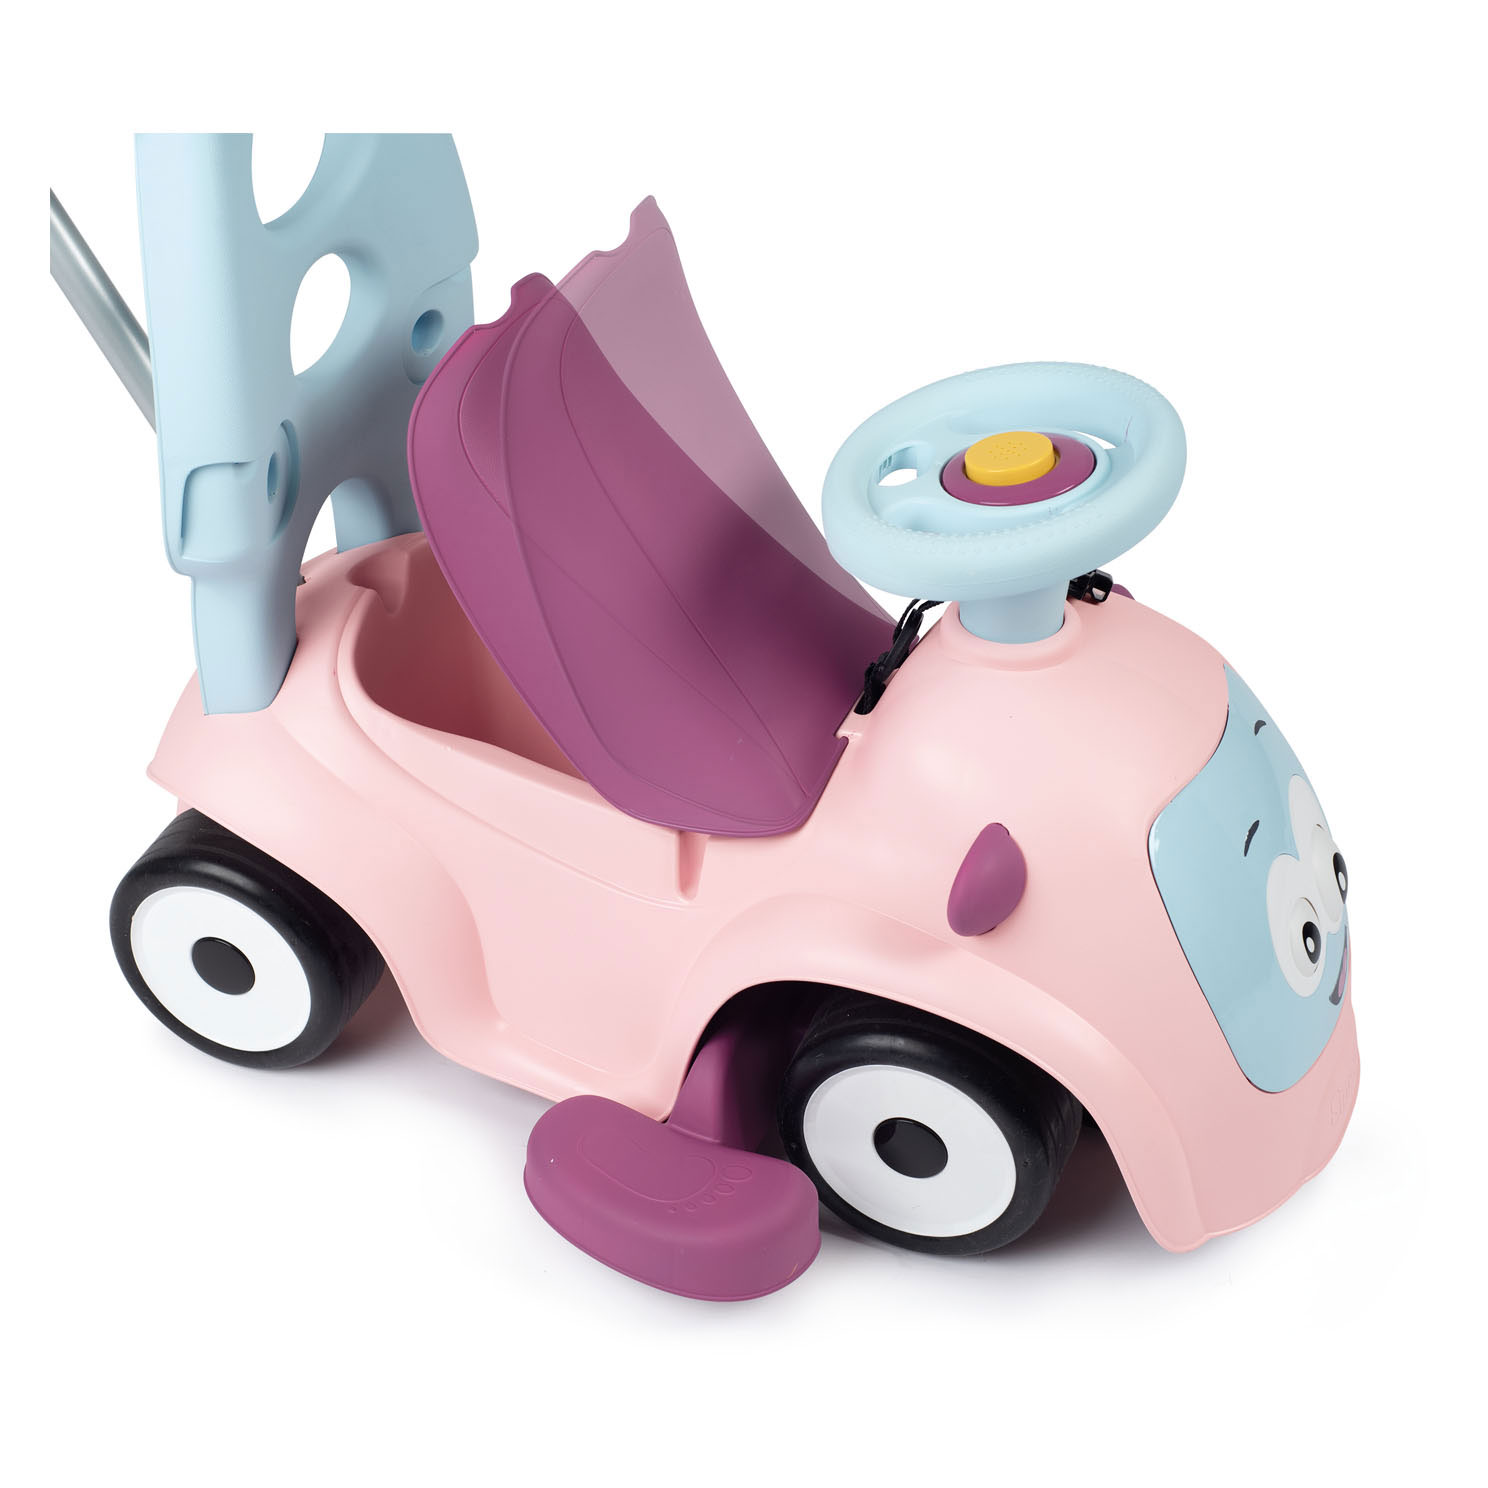 Smoby Maestro Ride On Walking Car Pink